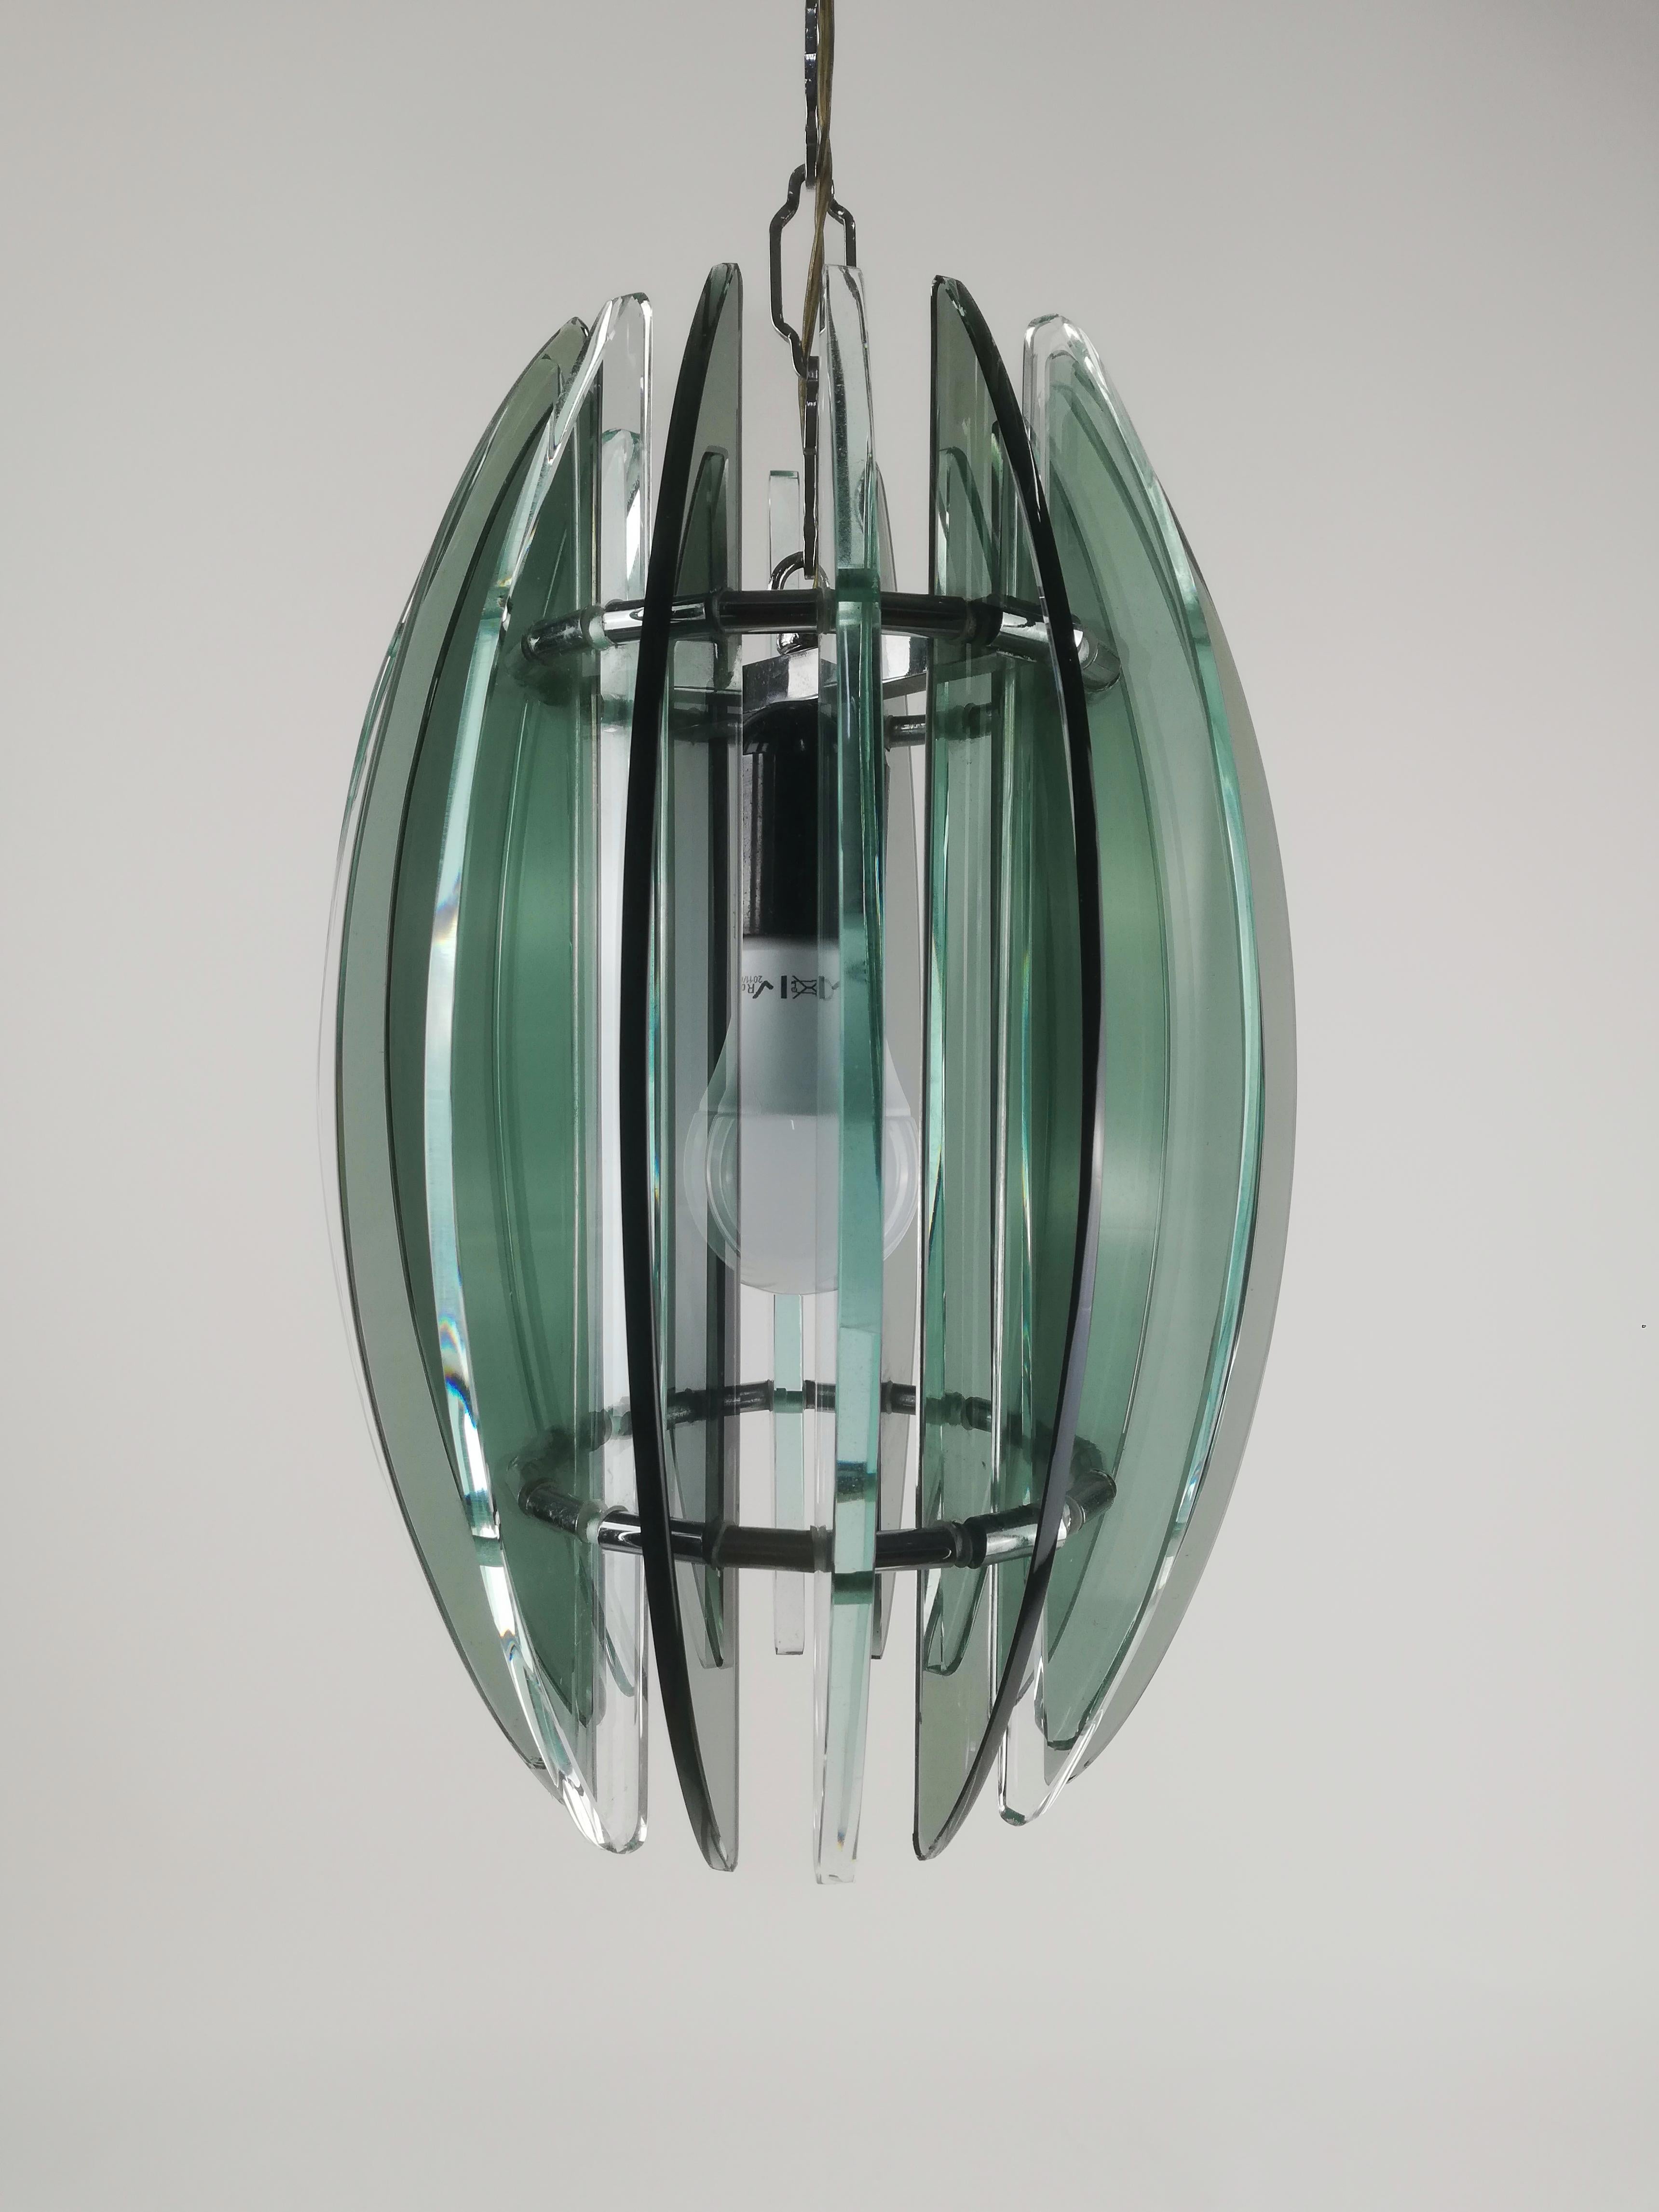 Italian Mid-Century Modern Chandelier by Veca in Fumè and Turquoise Glass For Sale 1